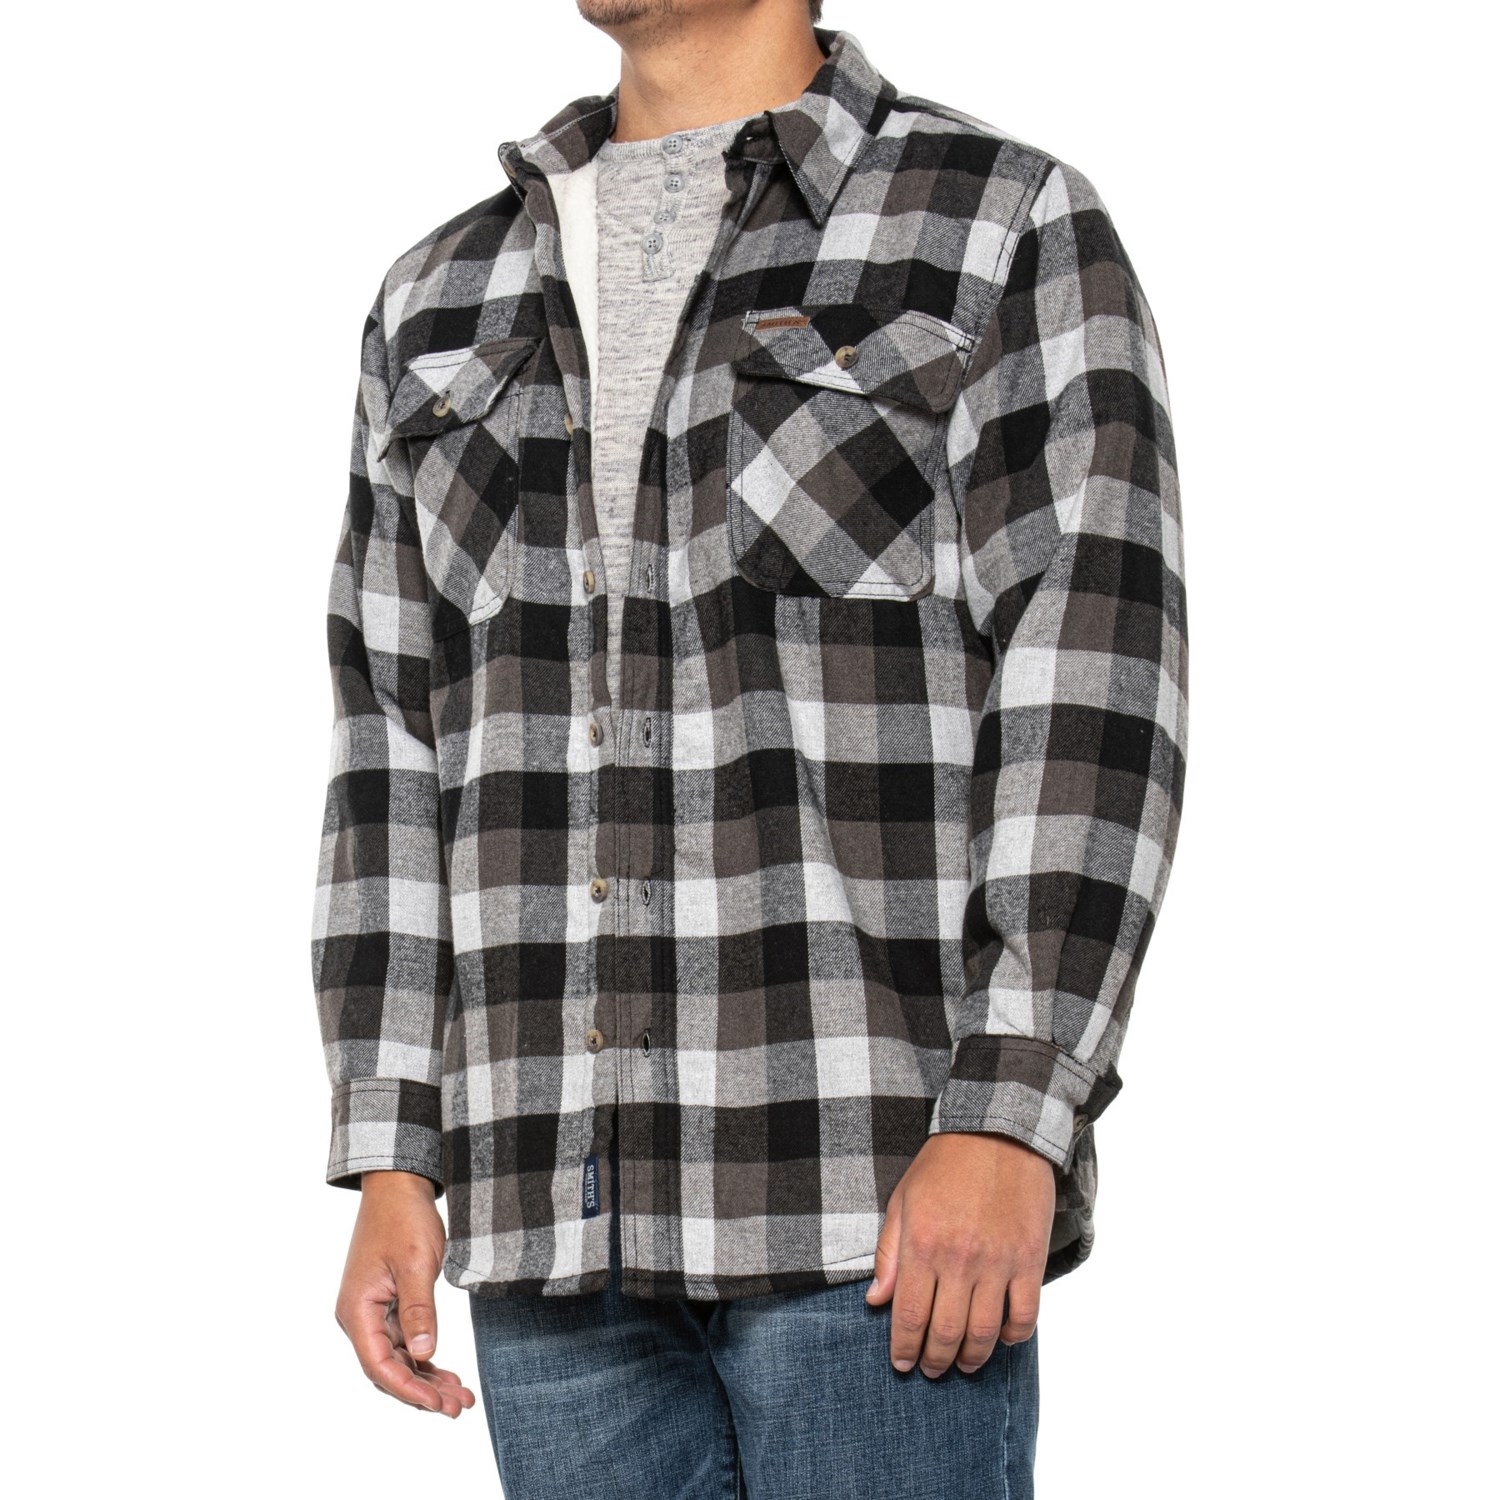 Smith's Workwear Flannel Shirt Jacket (For Men) - Save 40%